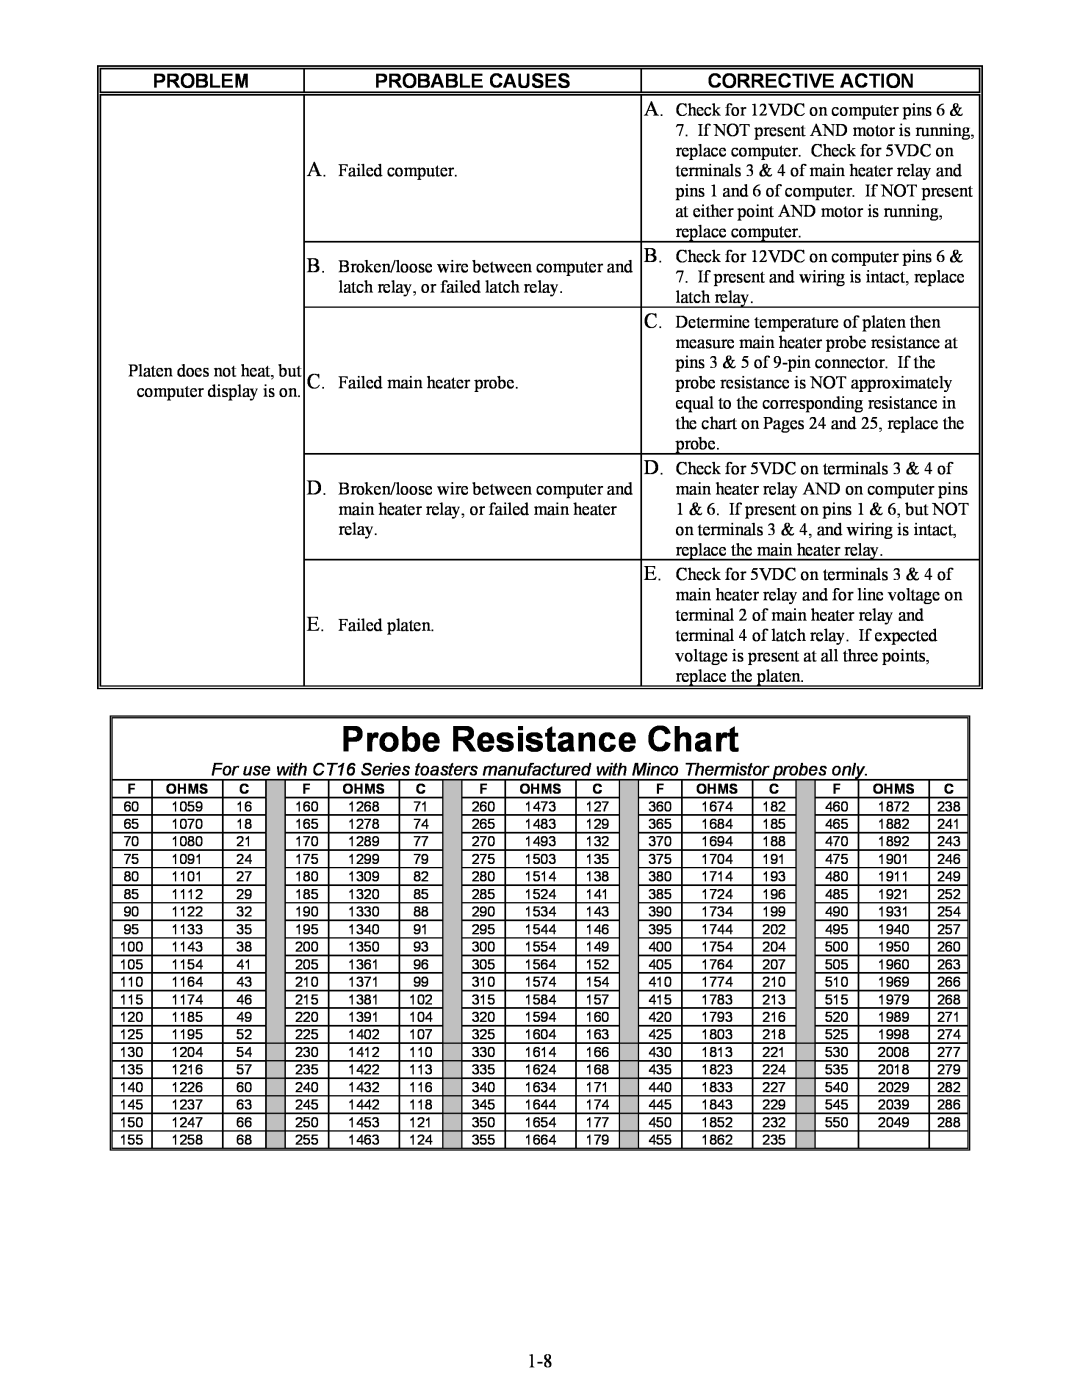 Frymaster CT16 Series manual Probe Resistance Chart, Problem, Probable Causes, Corrective Action 